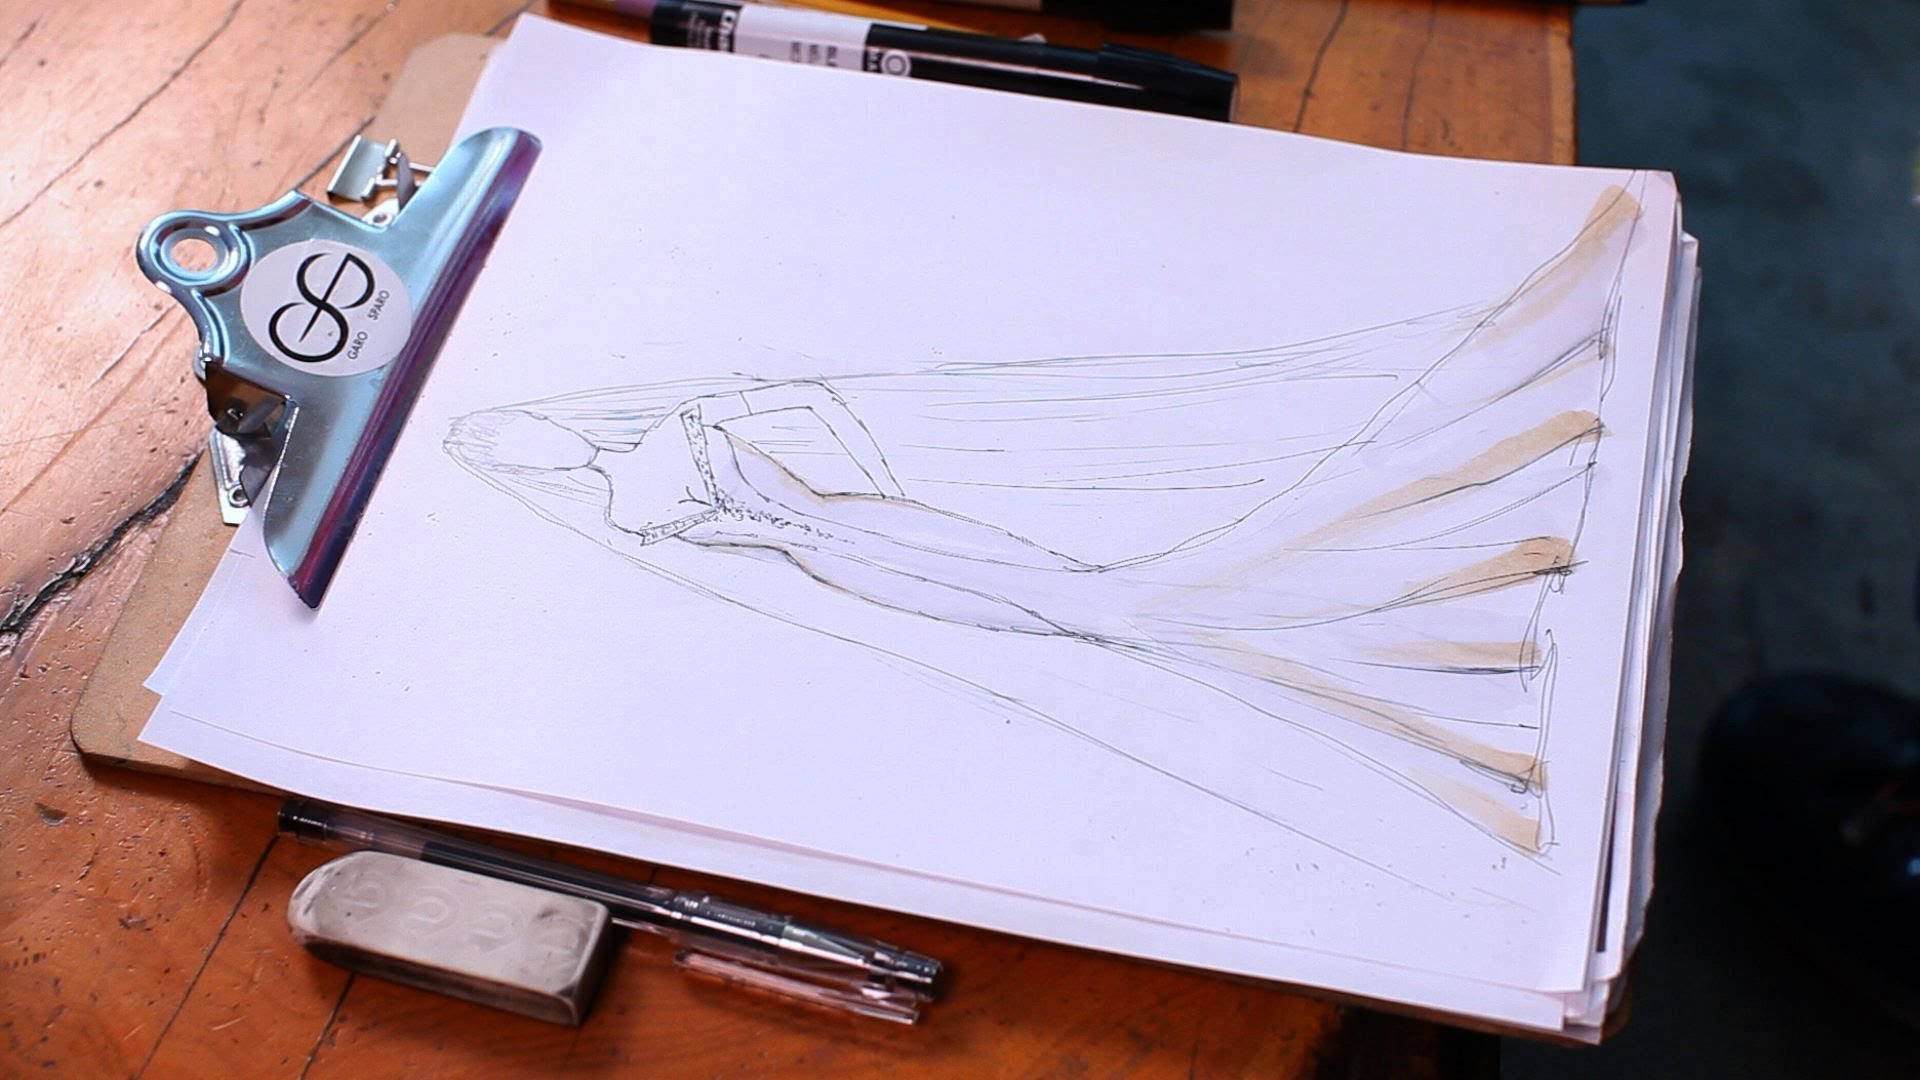 Drawing the sketch of the wedding gown